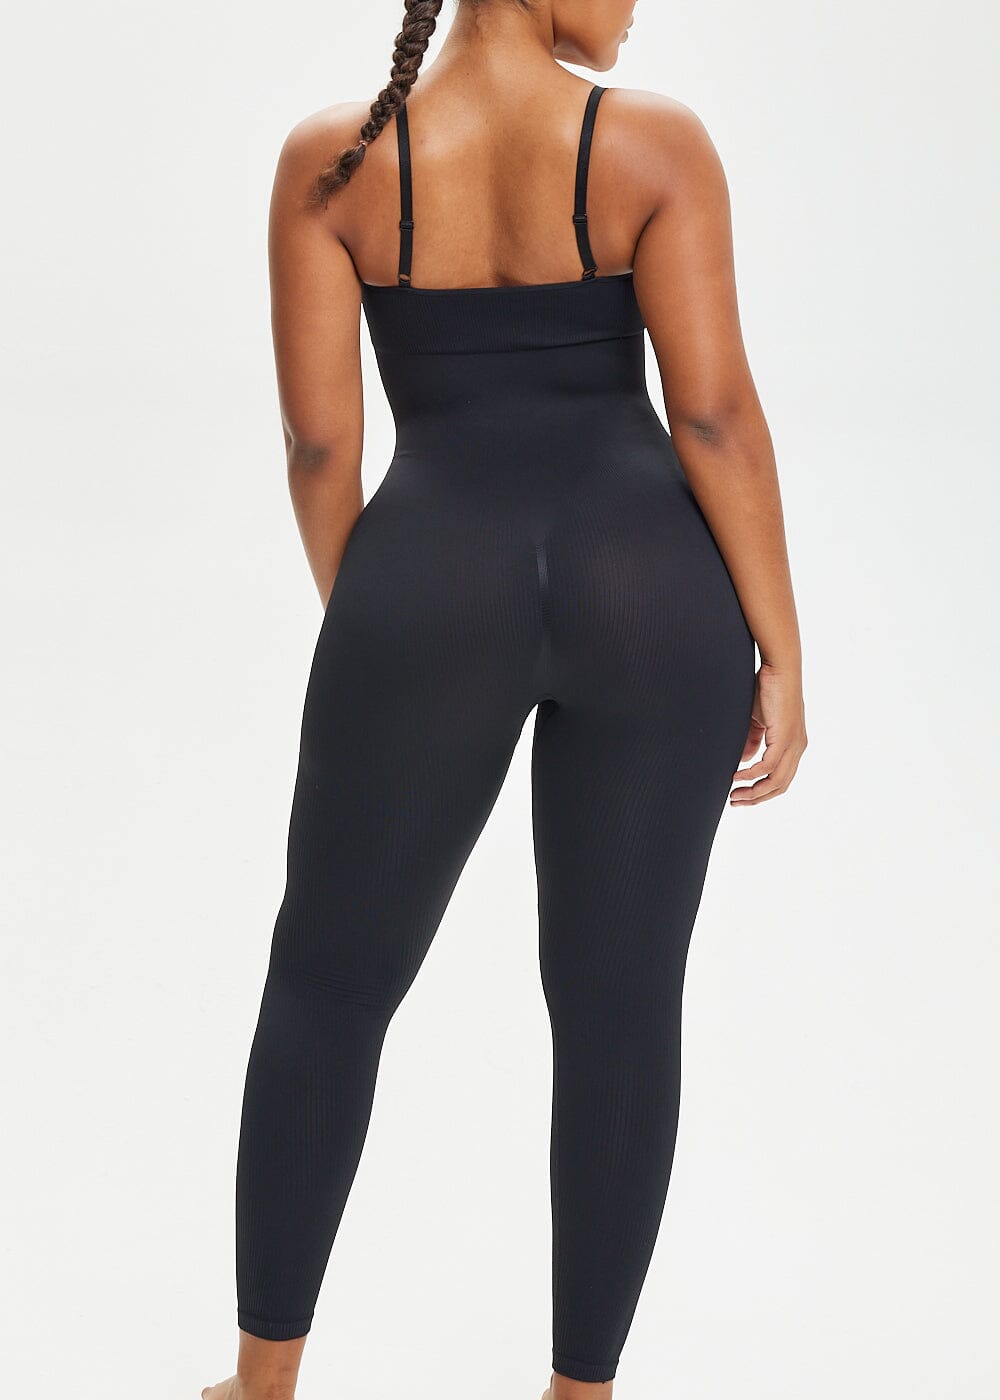 Snatching Seamless Jumpsuit Tank just entered the chat✨ 360 tummy